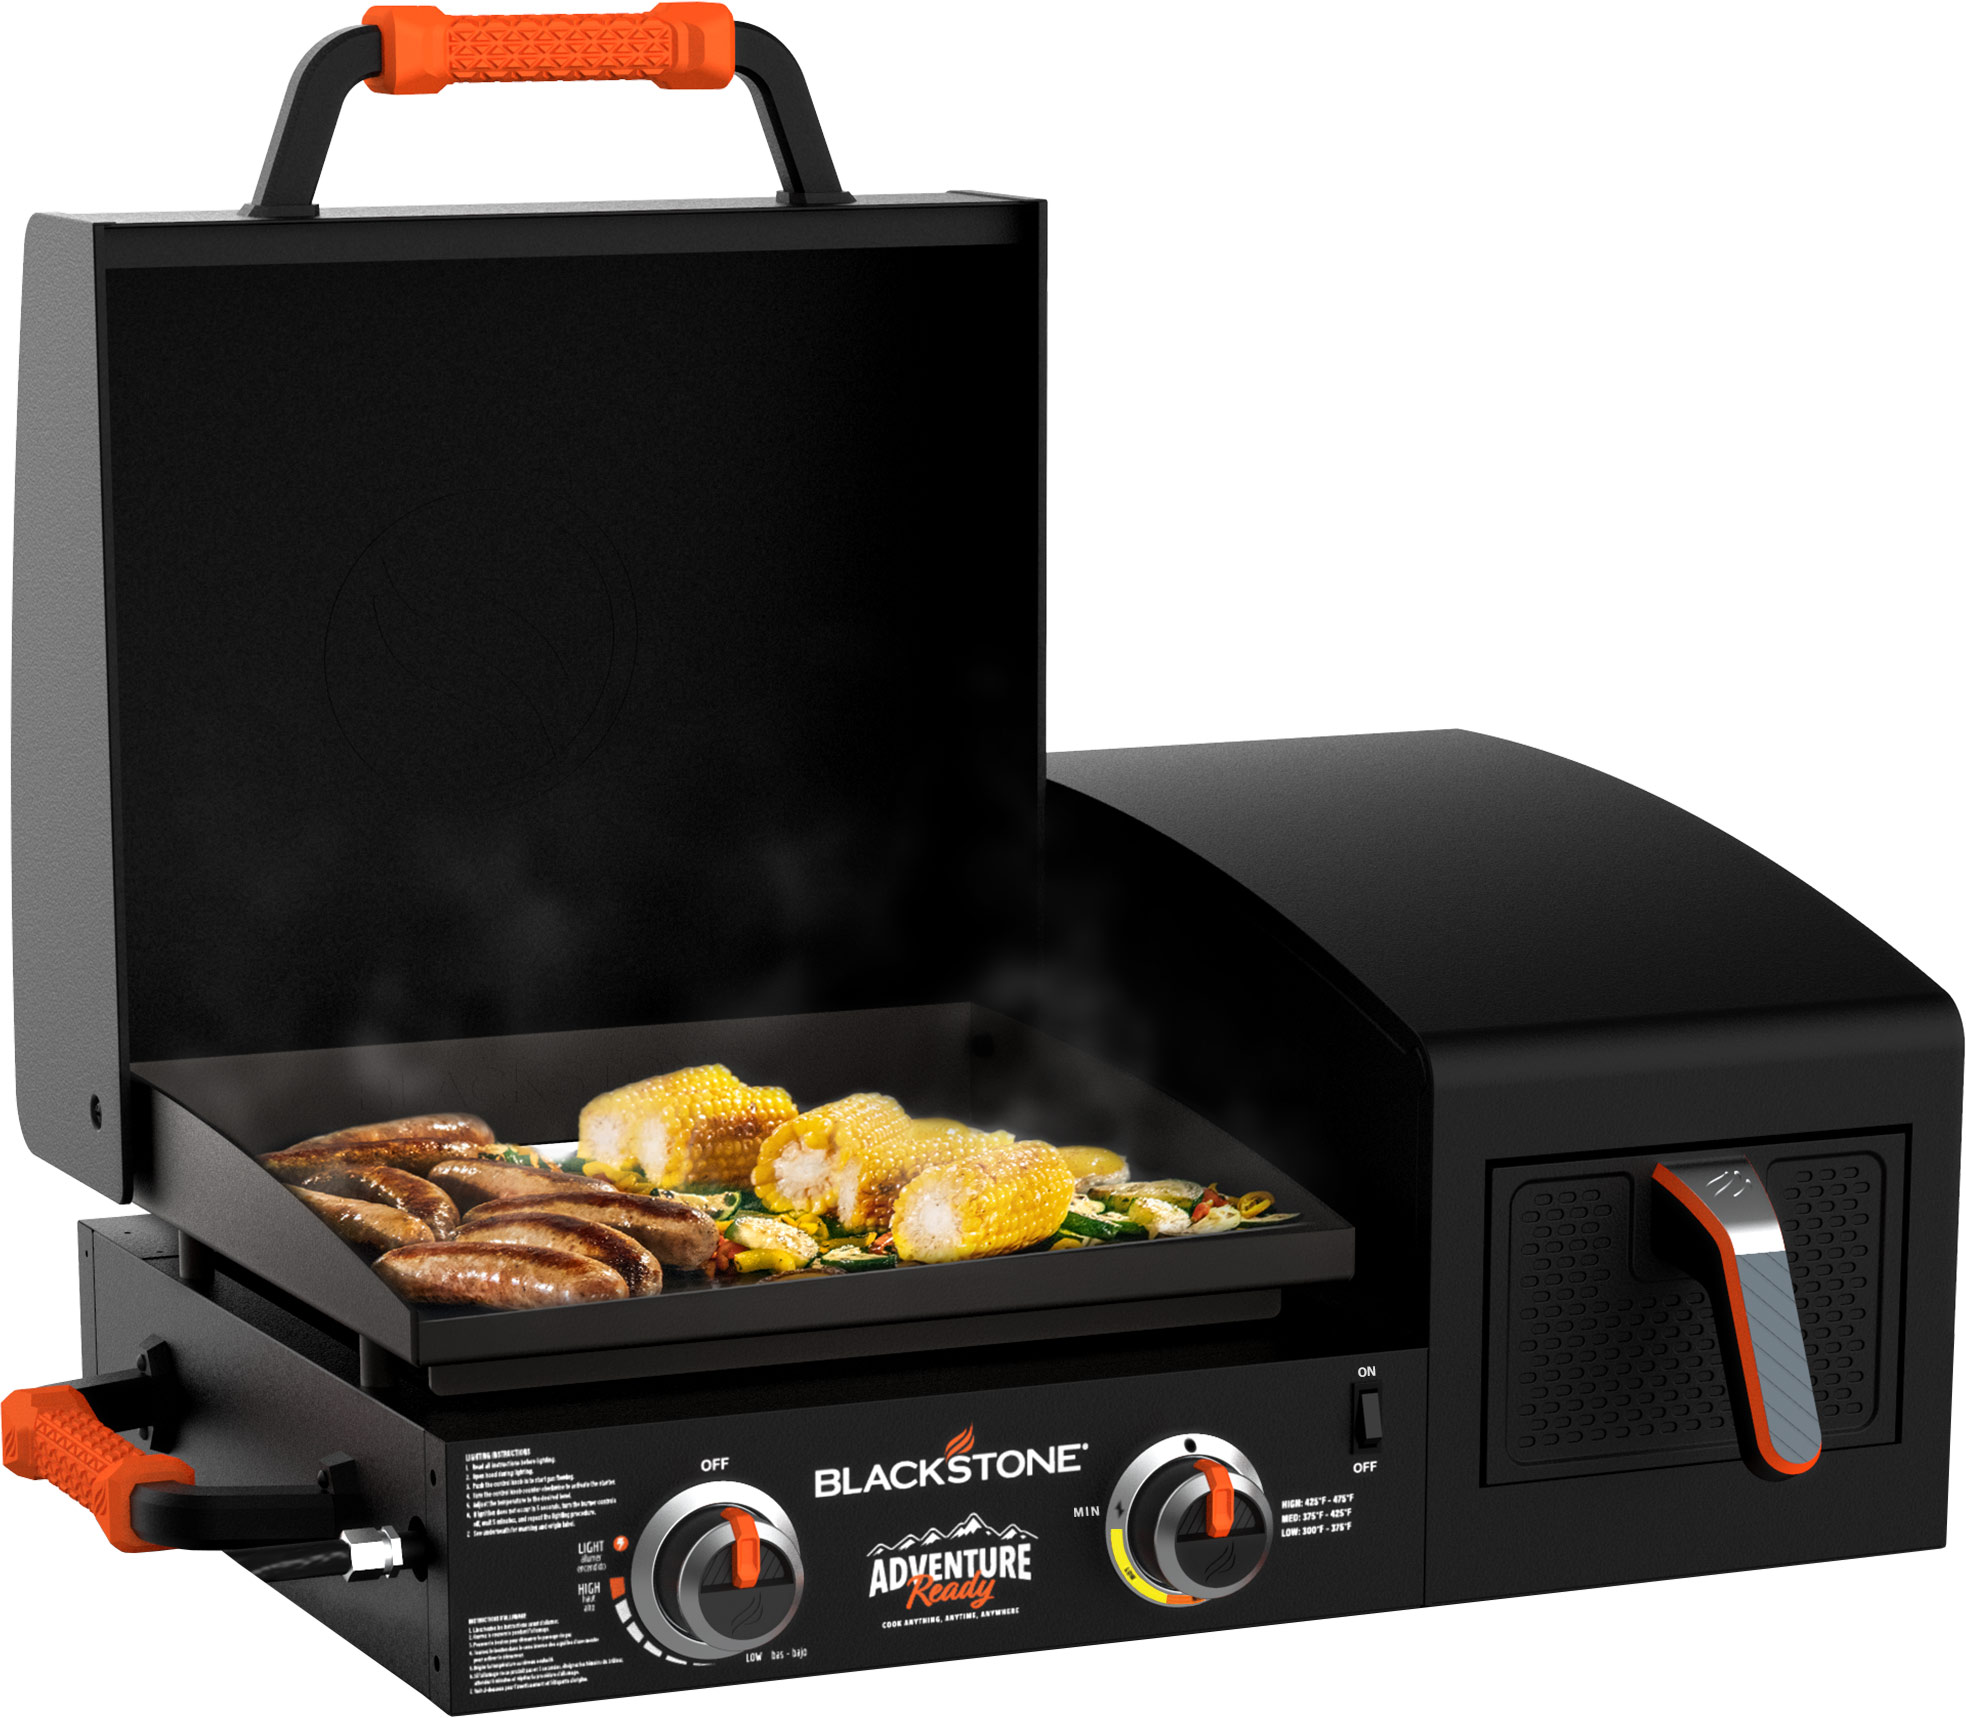 Blackstone Adventure Ready 17" Griddle with Electric Air Fryer - image 1 of 10